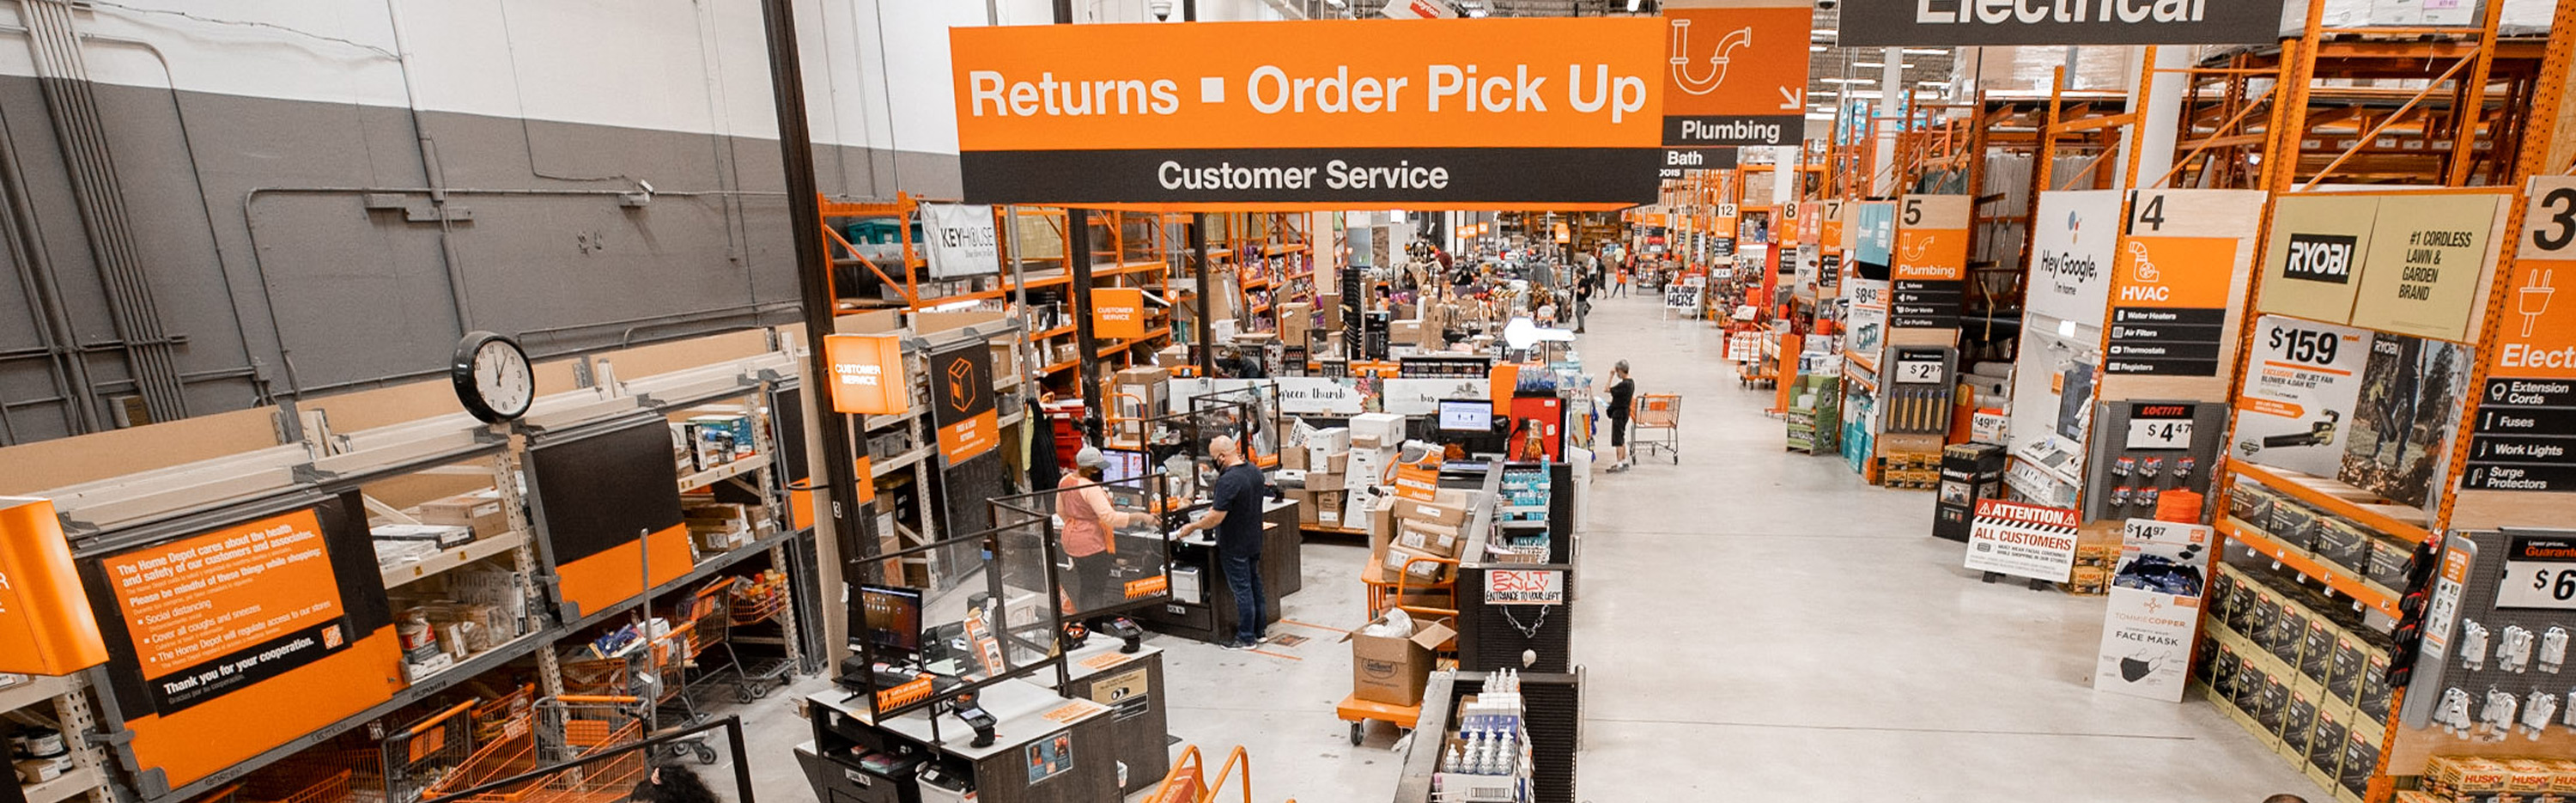 For Easy Returns, Give a Gift Receipt - The Home Depot